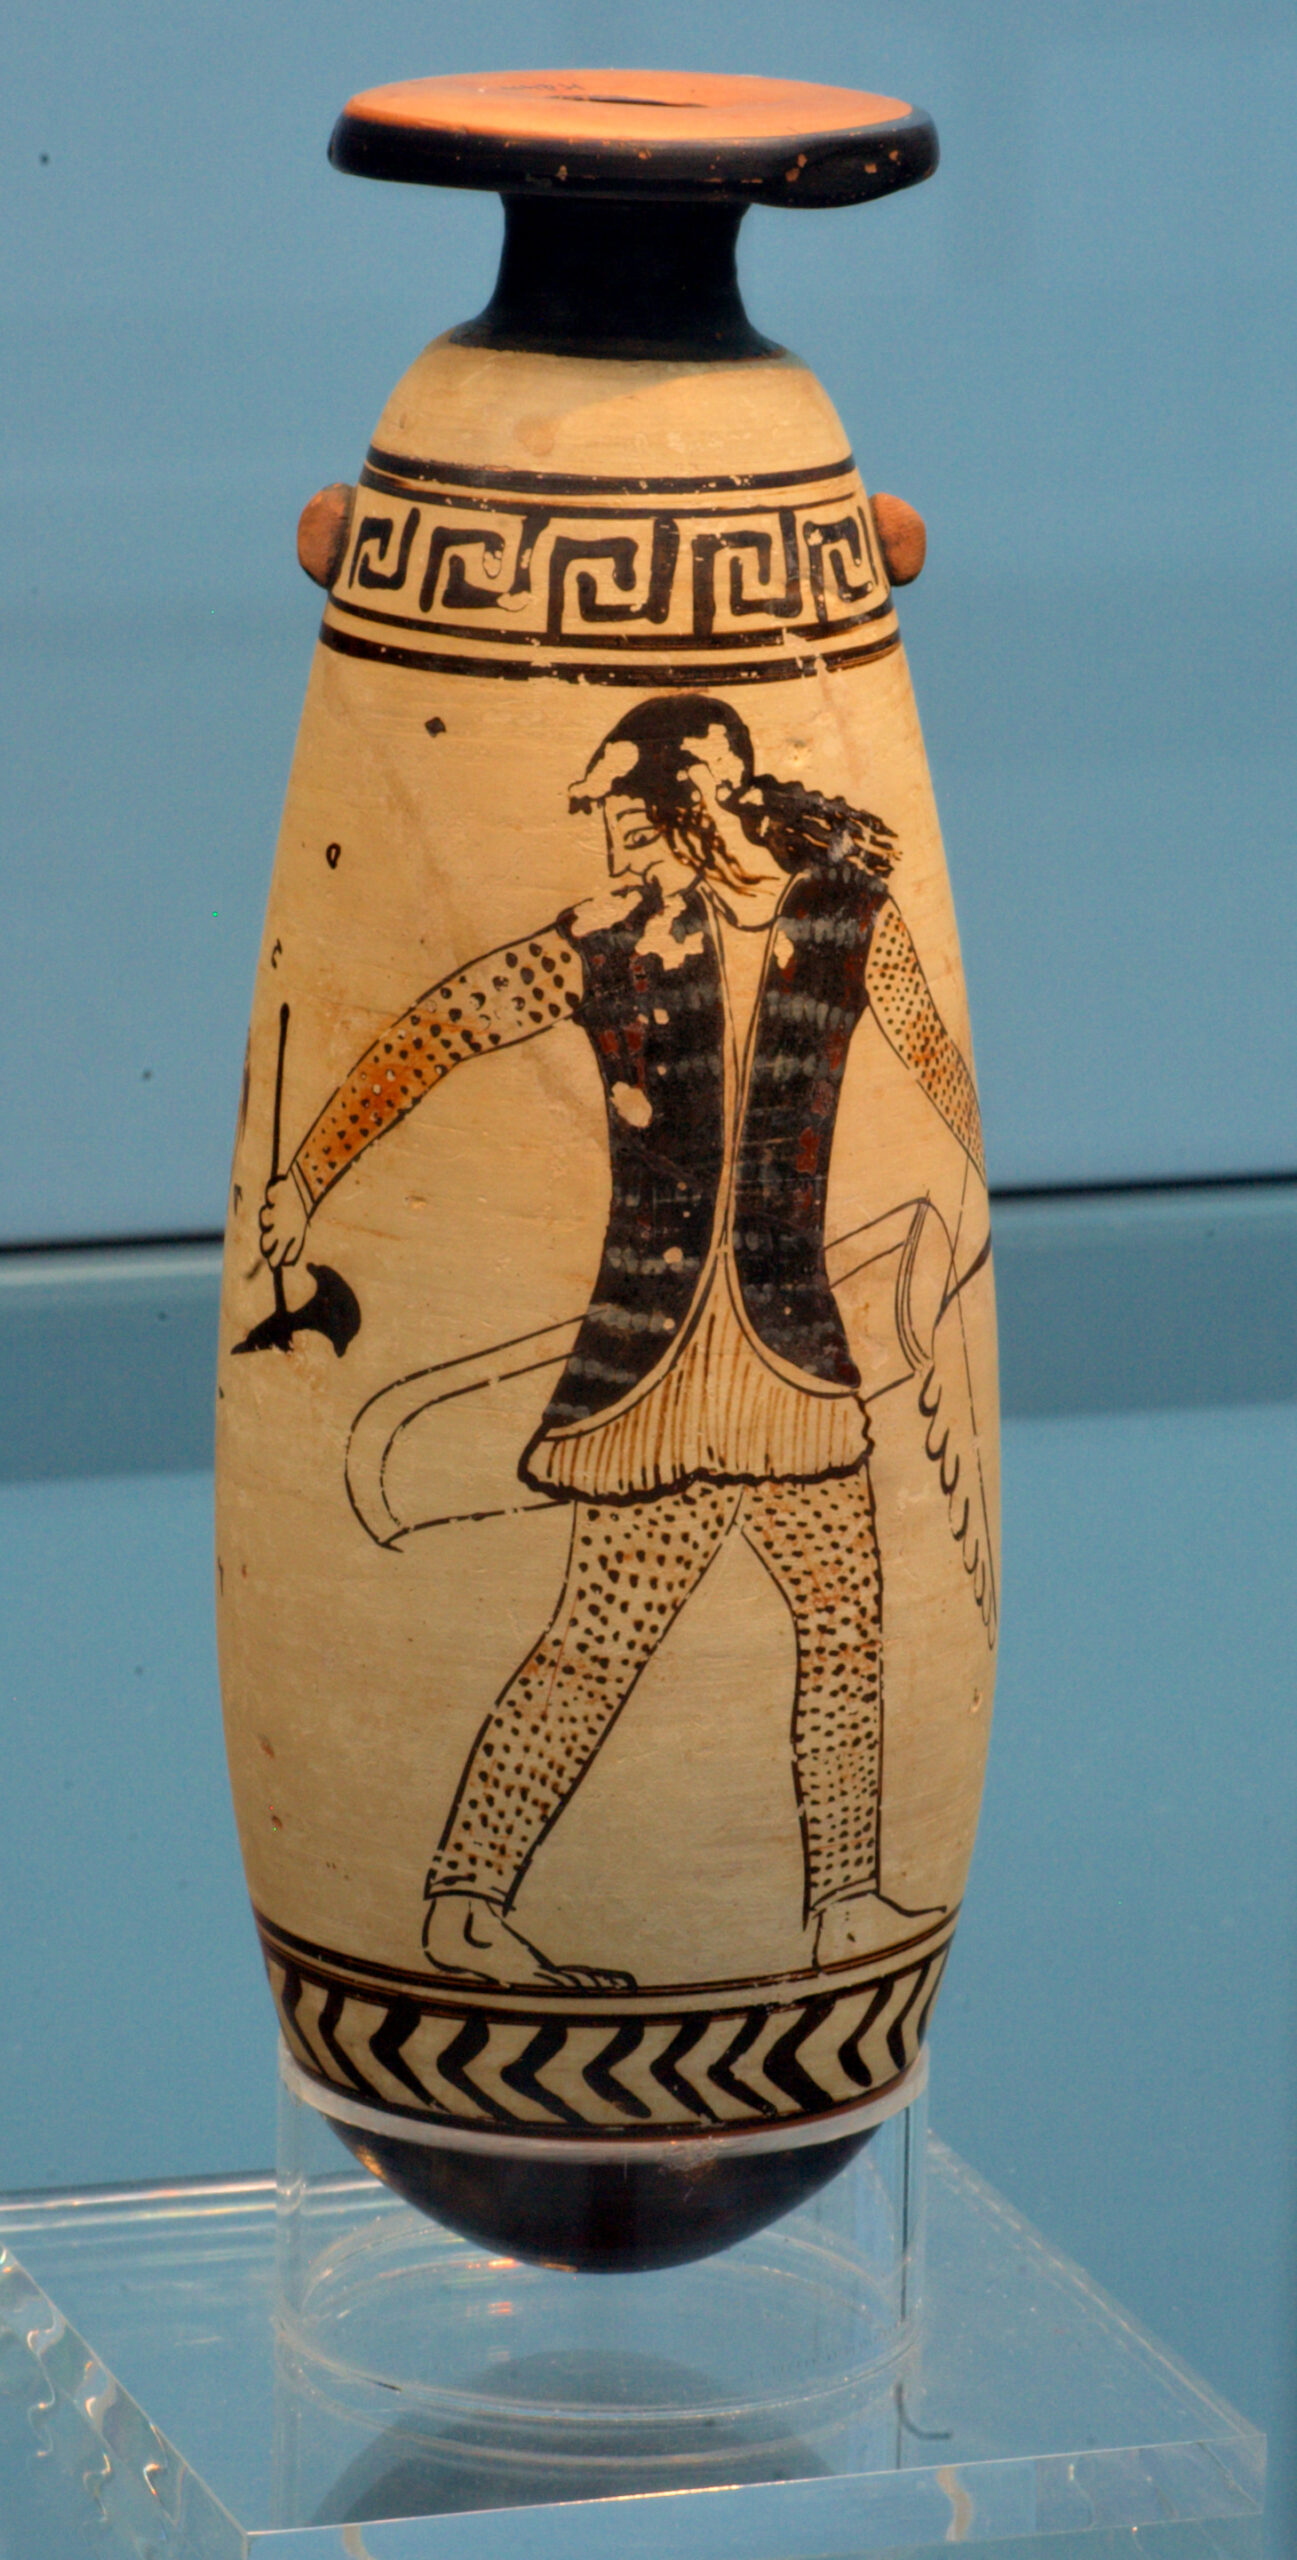 Vase painting: Amazon with ax and bow